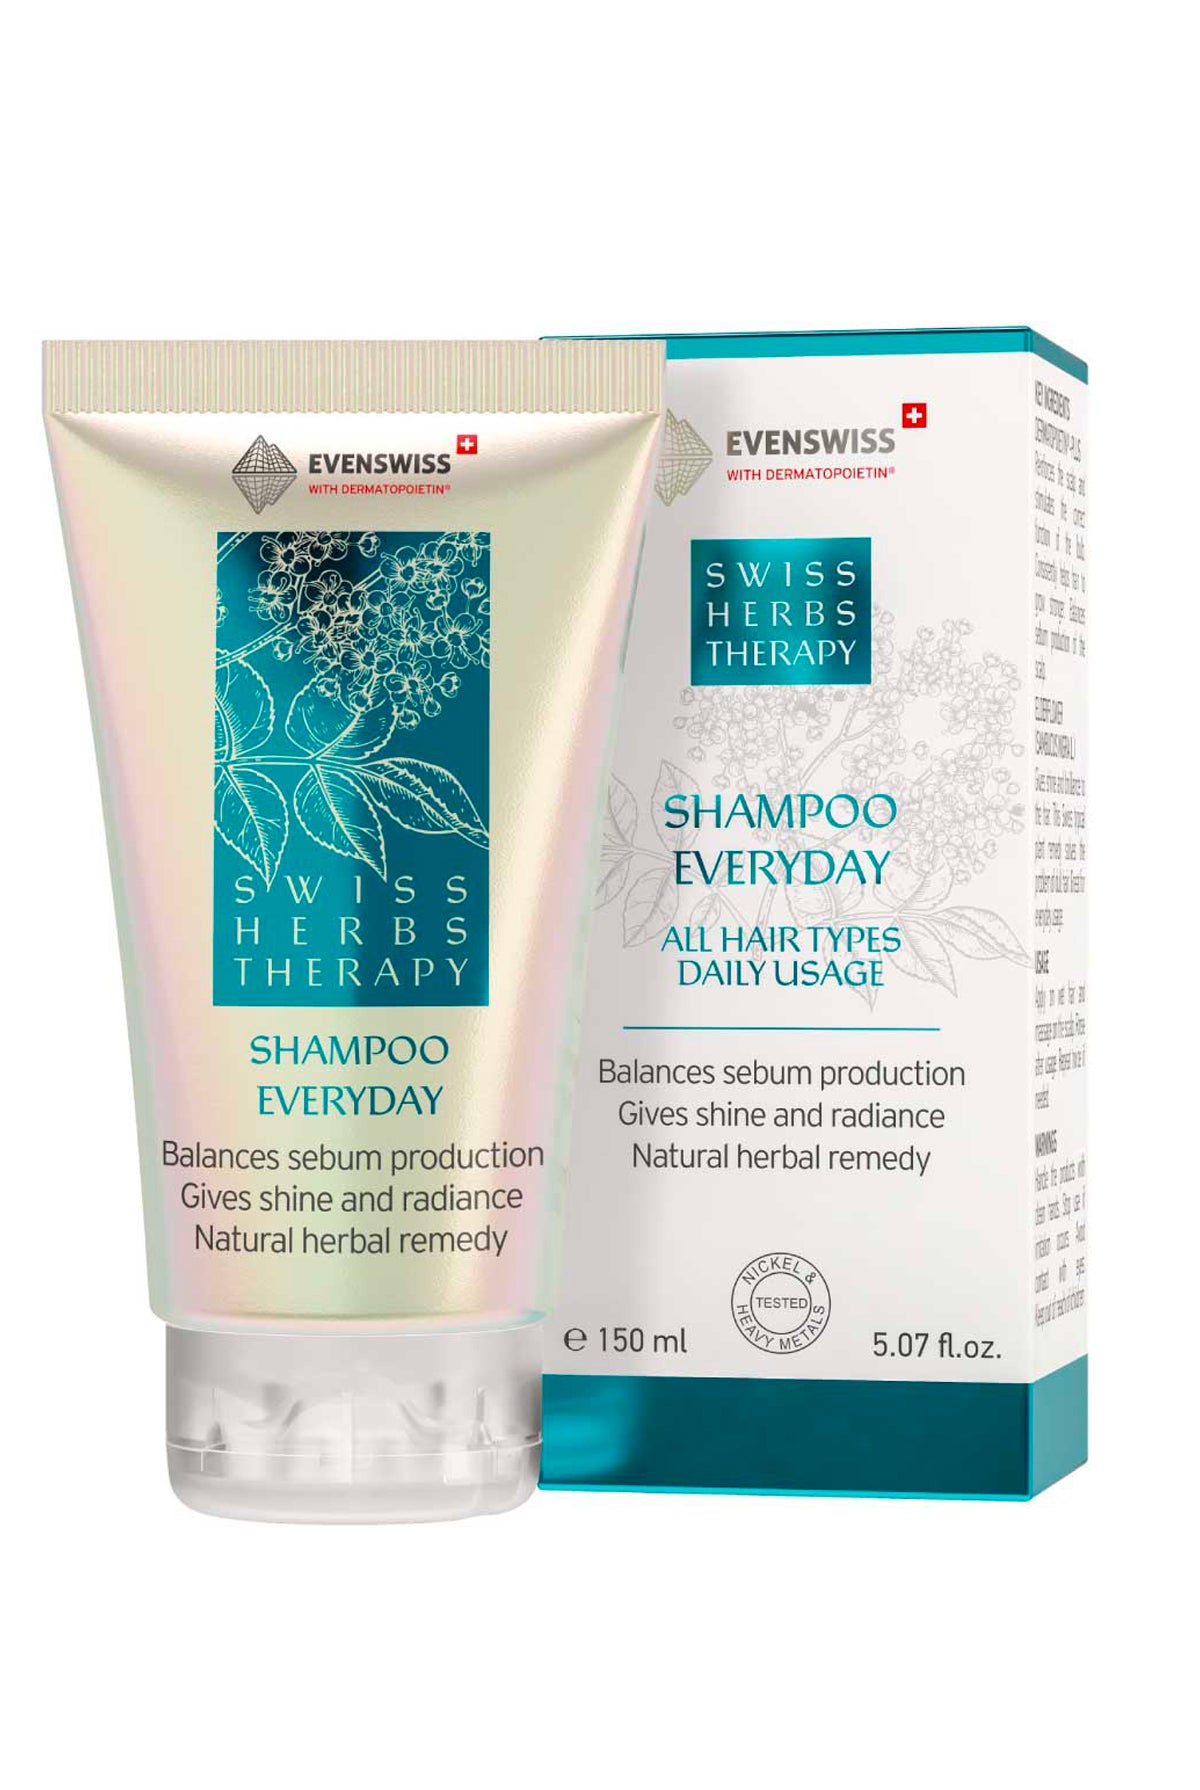 Evenswiss SHAMPOO EVERYDAY - SWISS HERBS THERAPY - 150ml